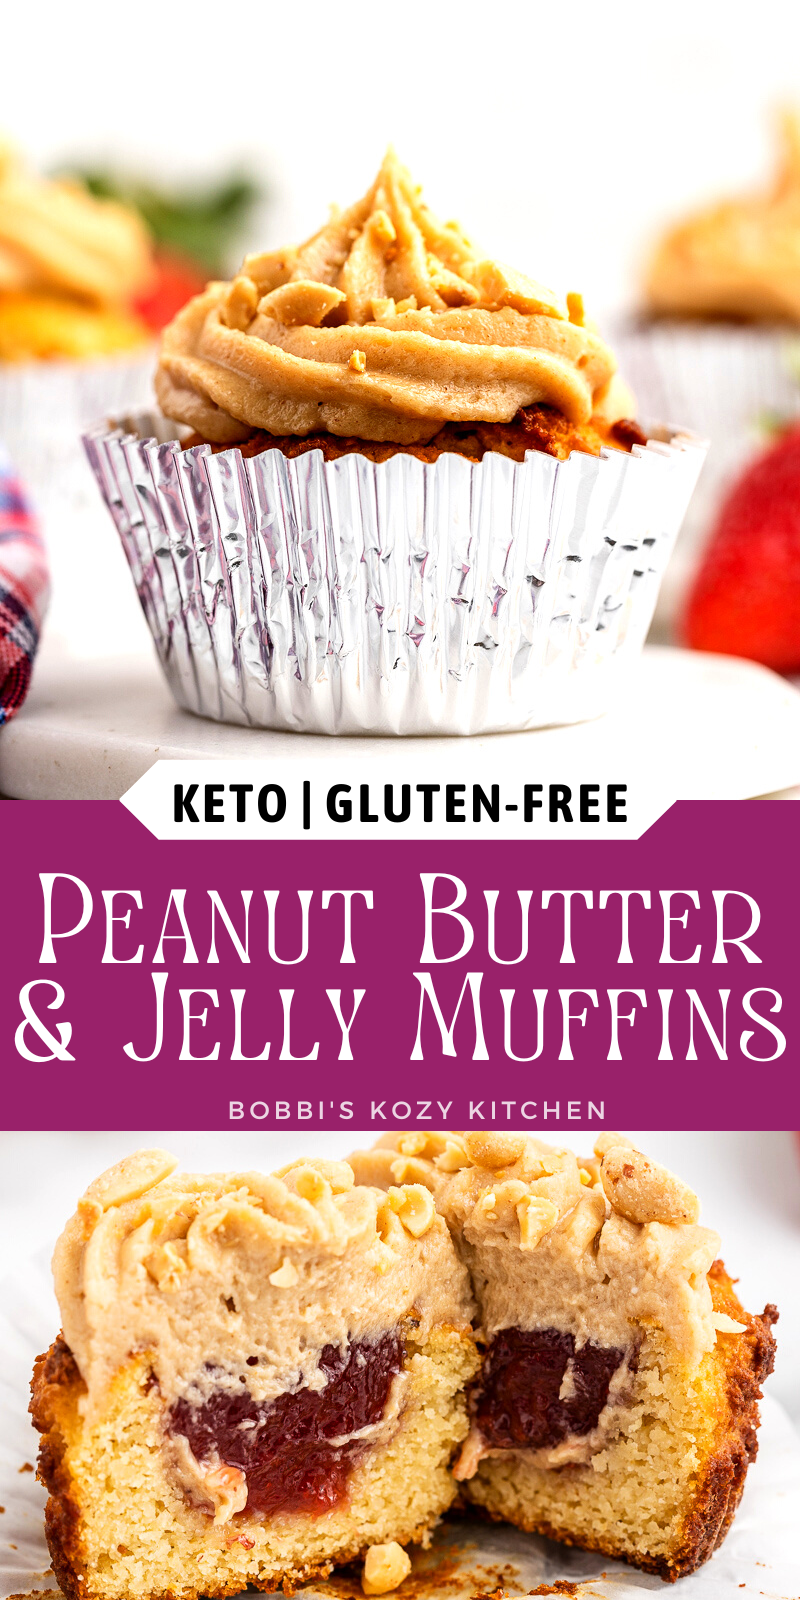 Keto Peanut Butter and Jelly Muffins - These Keto Peanut Butter and Jelly Muffins are deliciously moist and fluffy, filled with mixed berry jam, and topped with a swirl of peanut butter frosting! #keto #lowcarb #glutenfree #sugarfree #peanutbutter #jelly #muffins